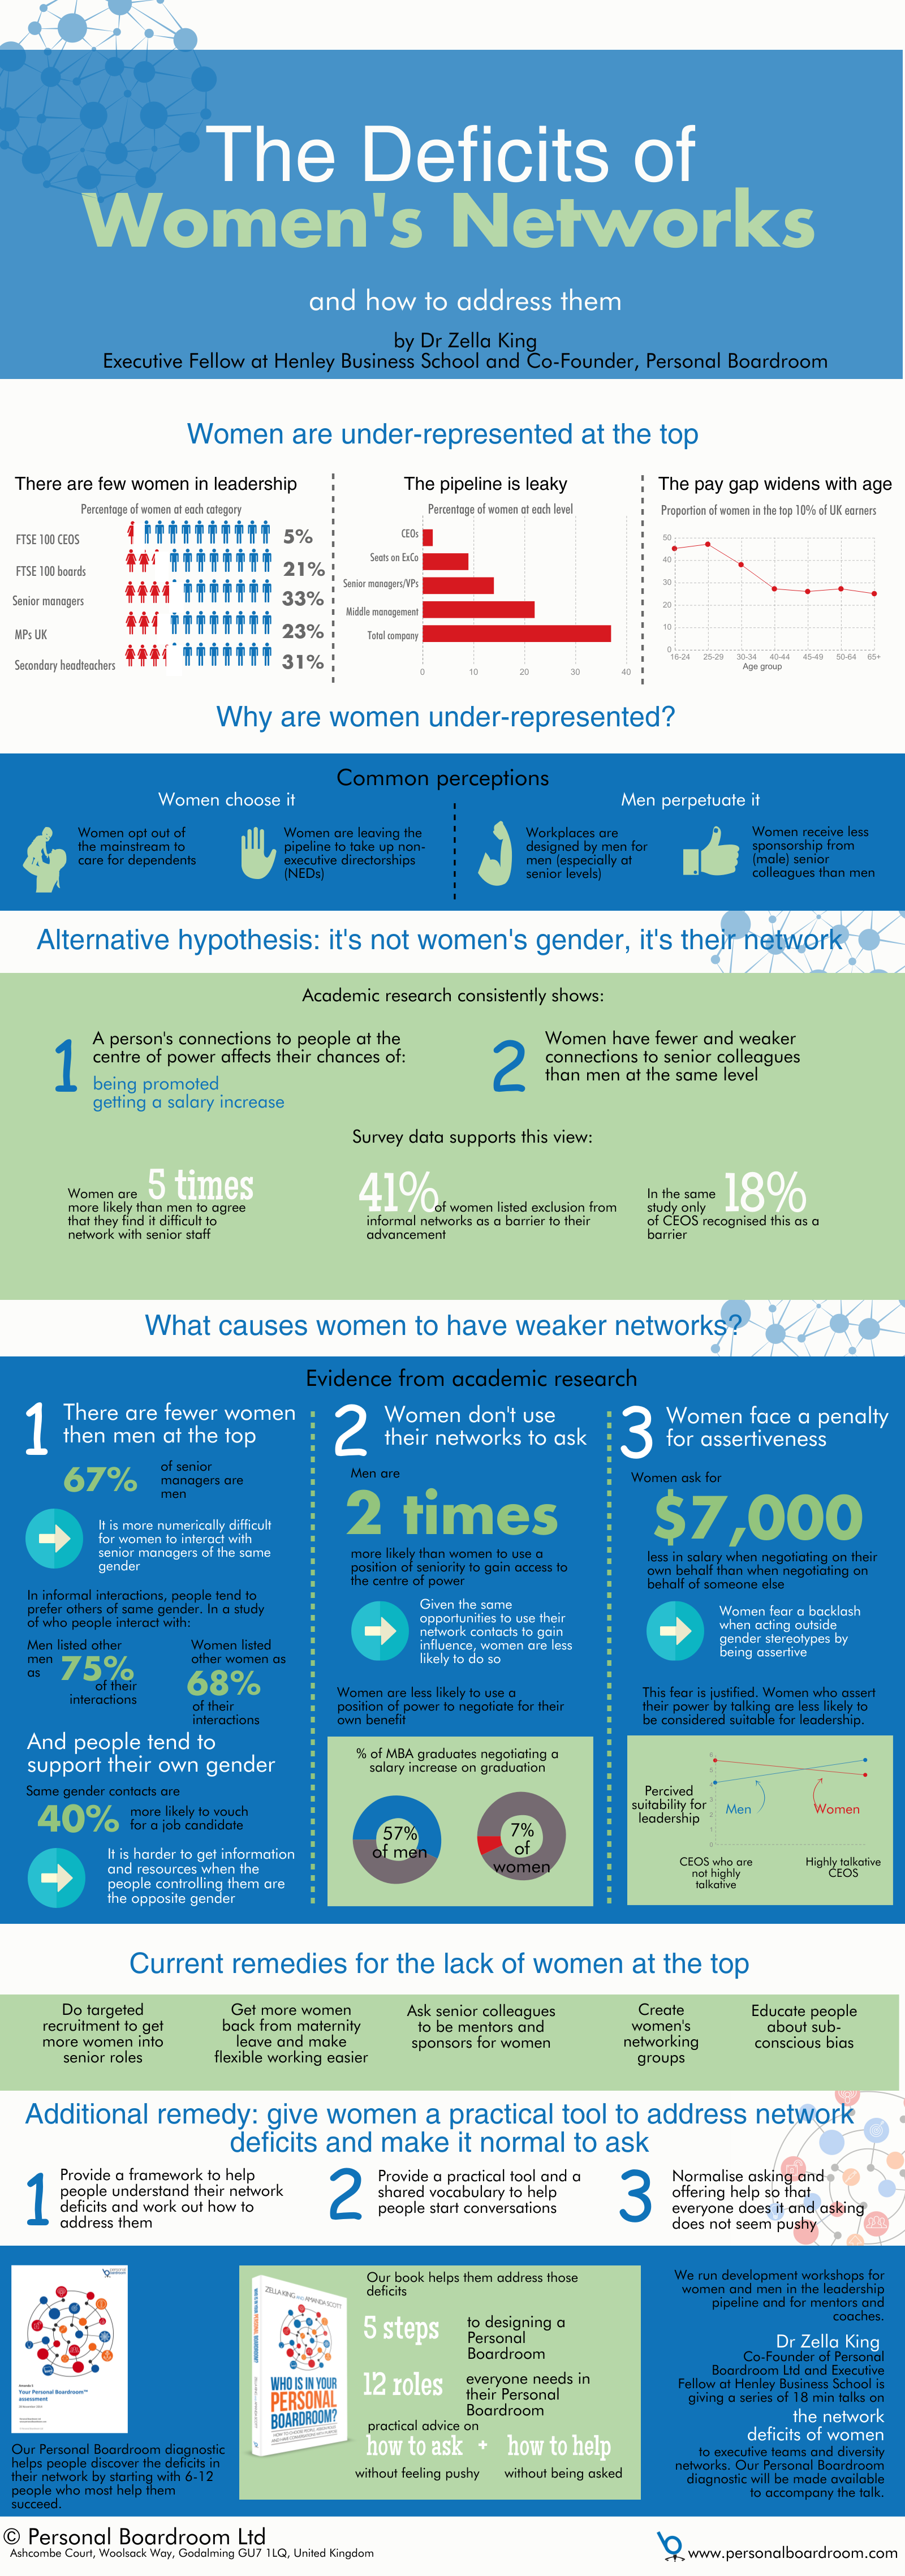 Deficits of Women's Networks infographic and statistics